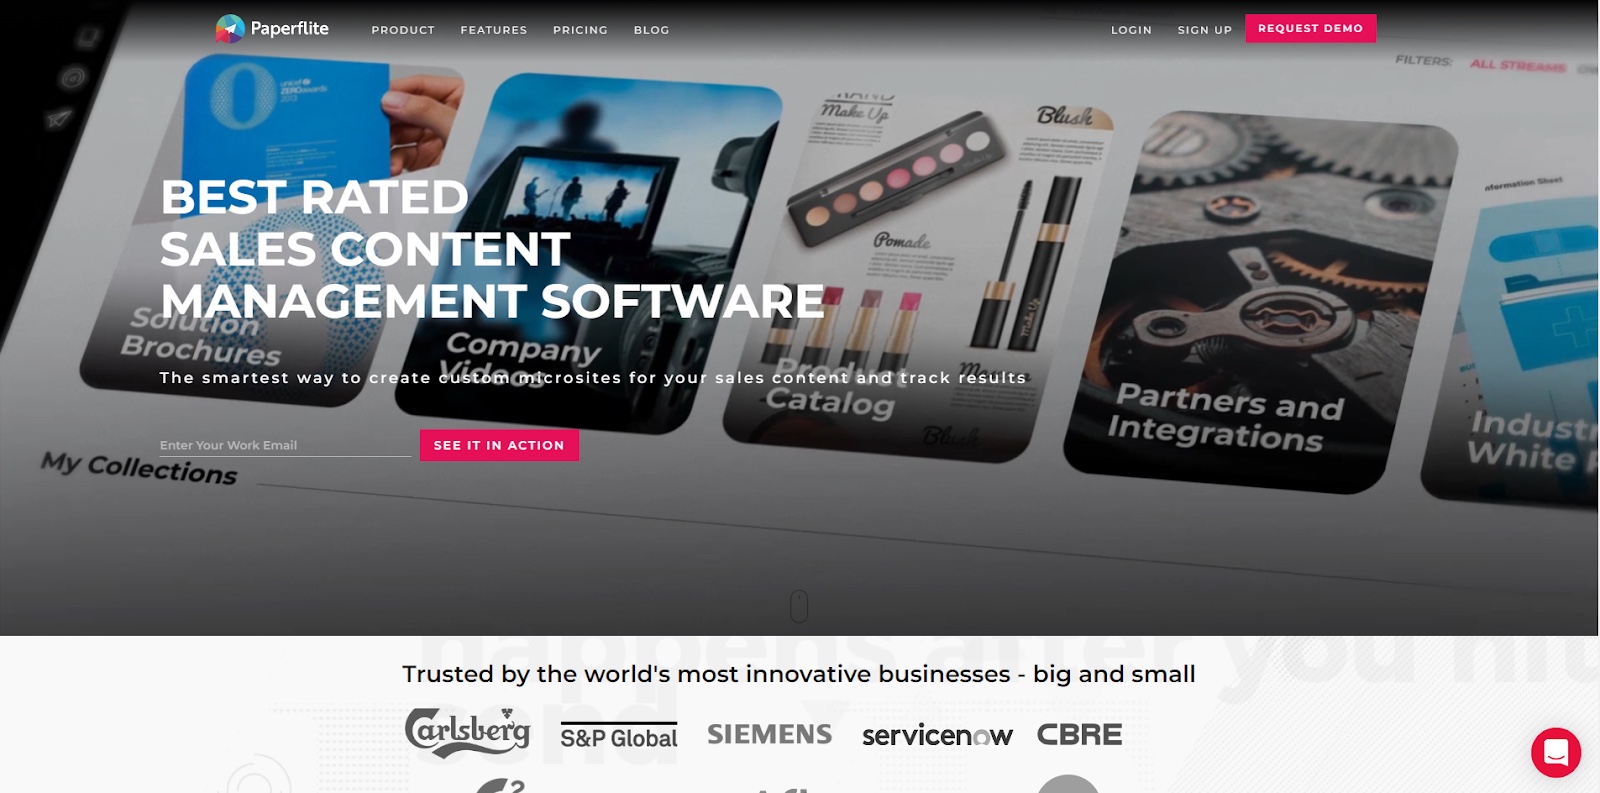 Sales enablement software by Paperflite